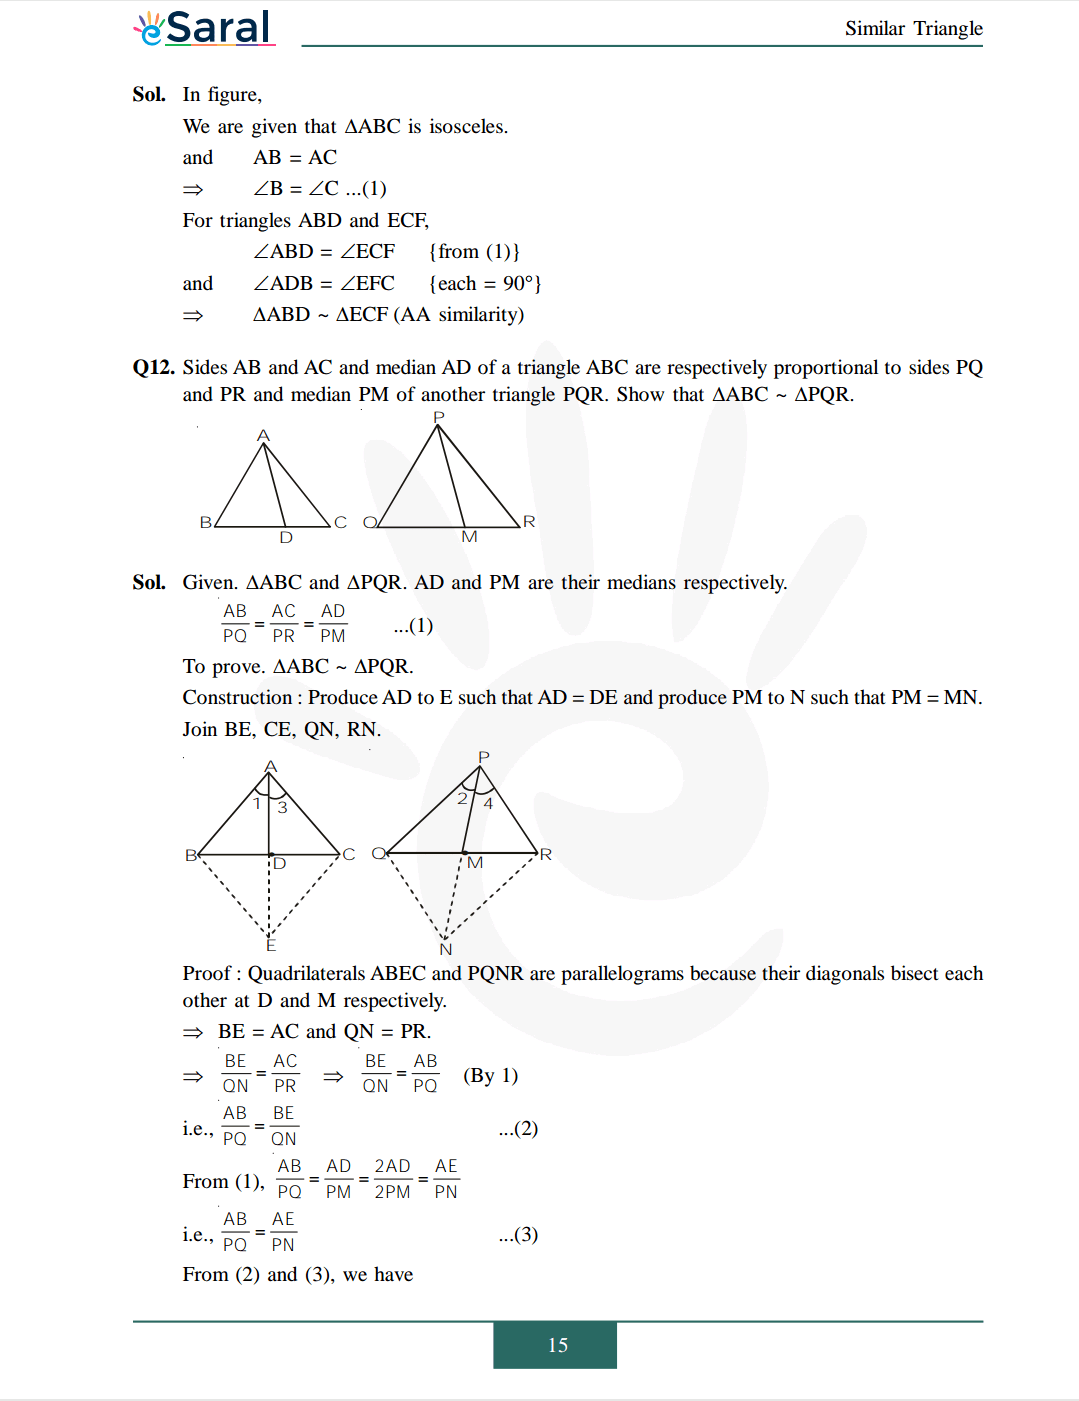 Class 10 Maths Chapter 6 exercise 6.3 solutions Image 8